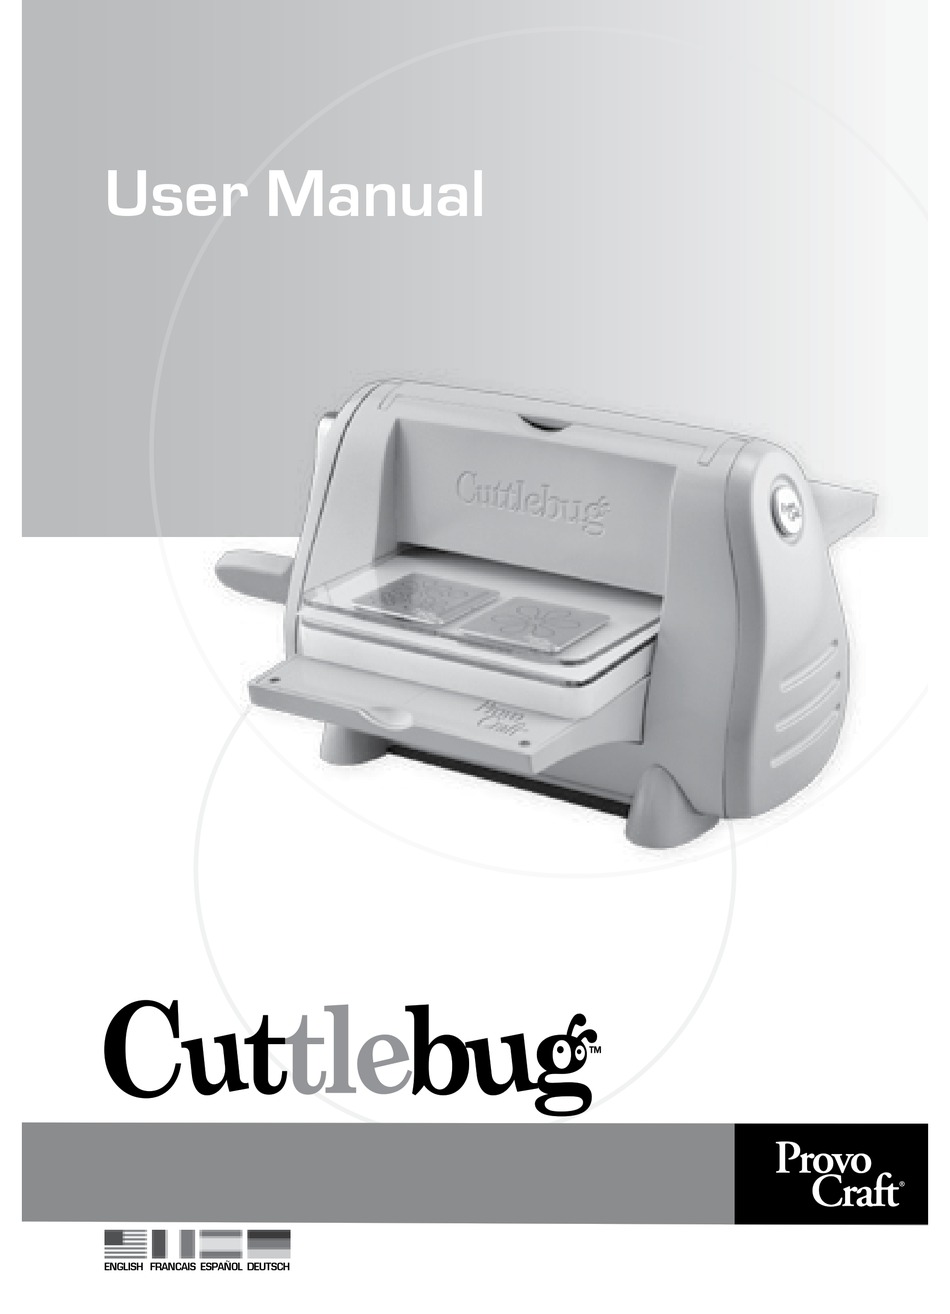 Cuttlebug: All-In-One Instructions – Help Center